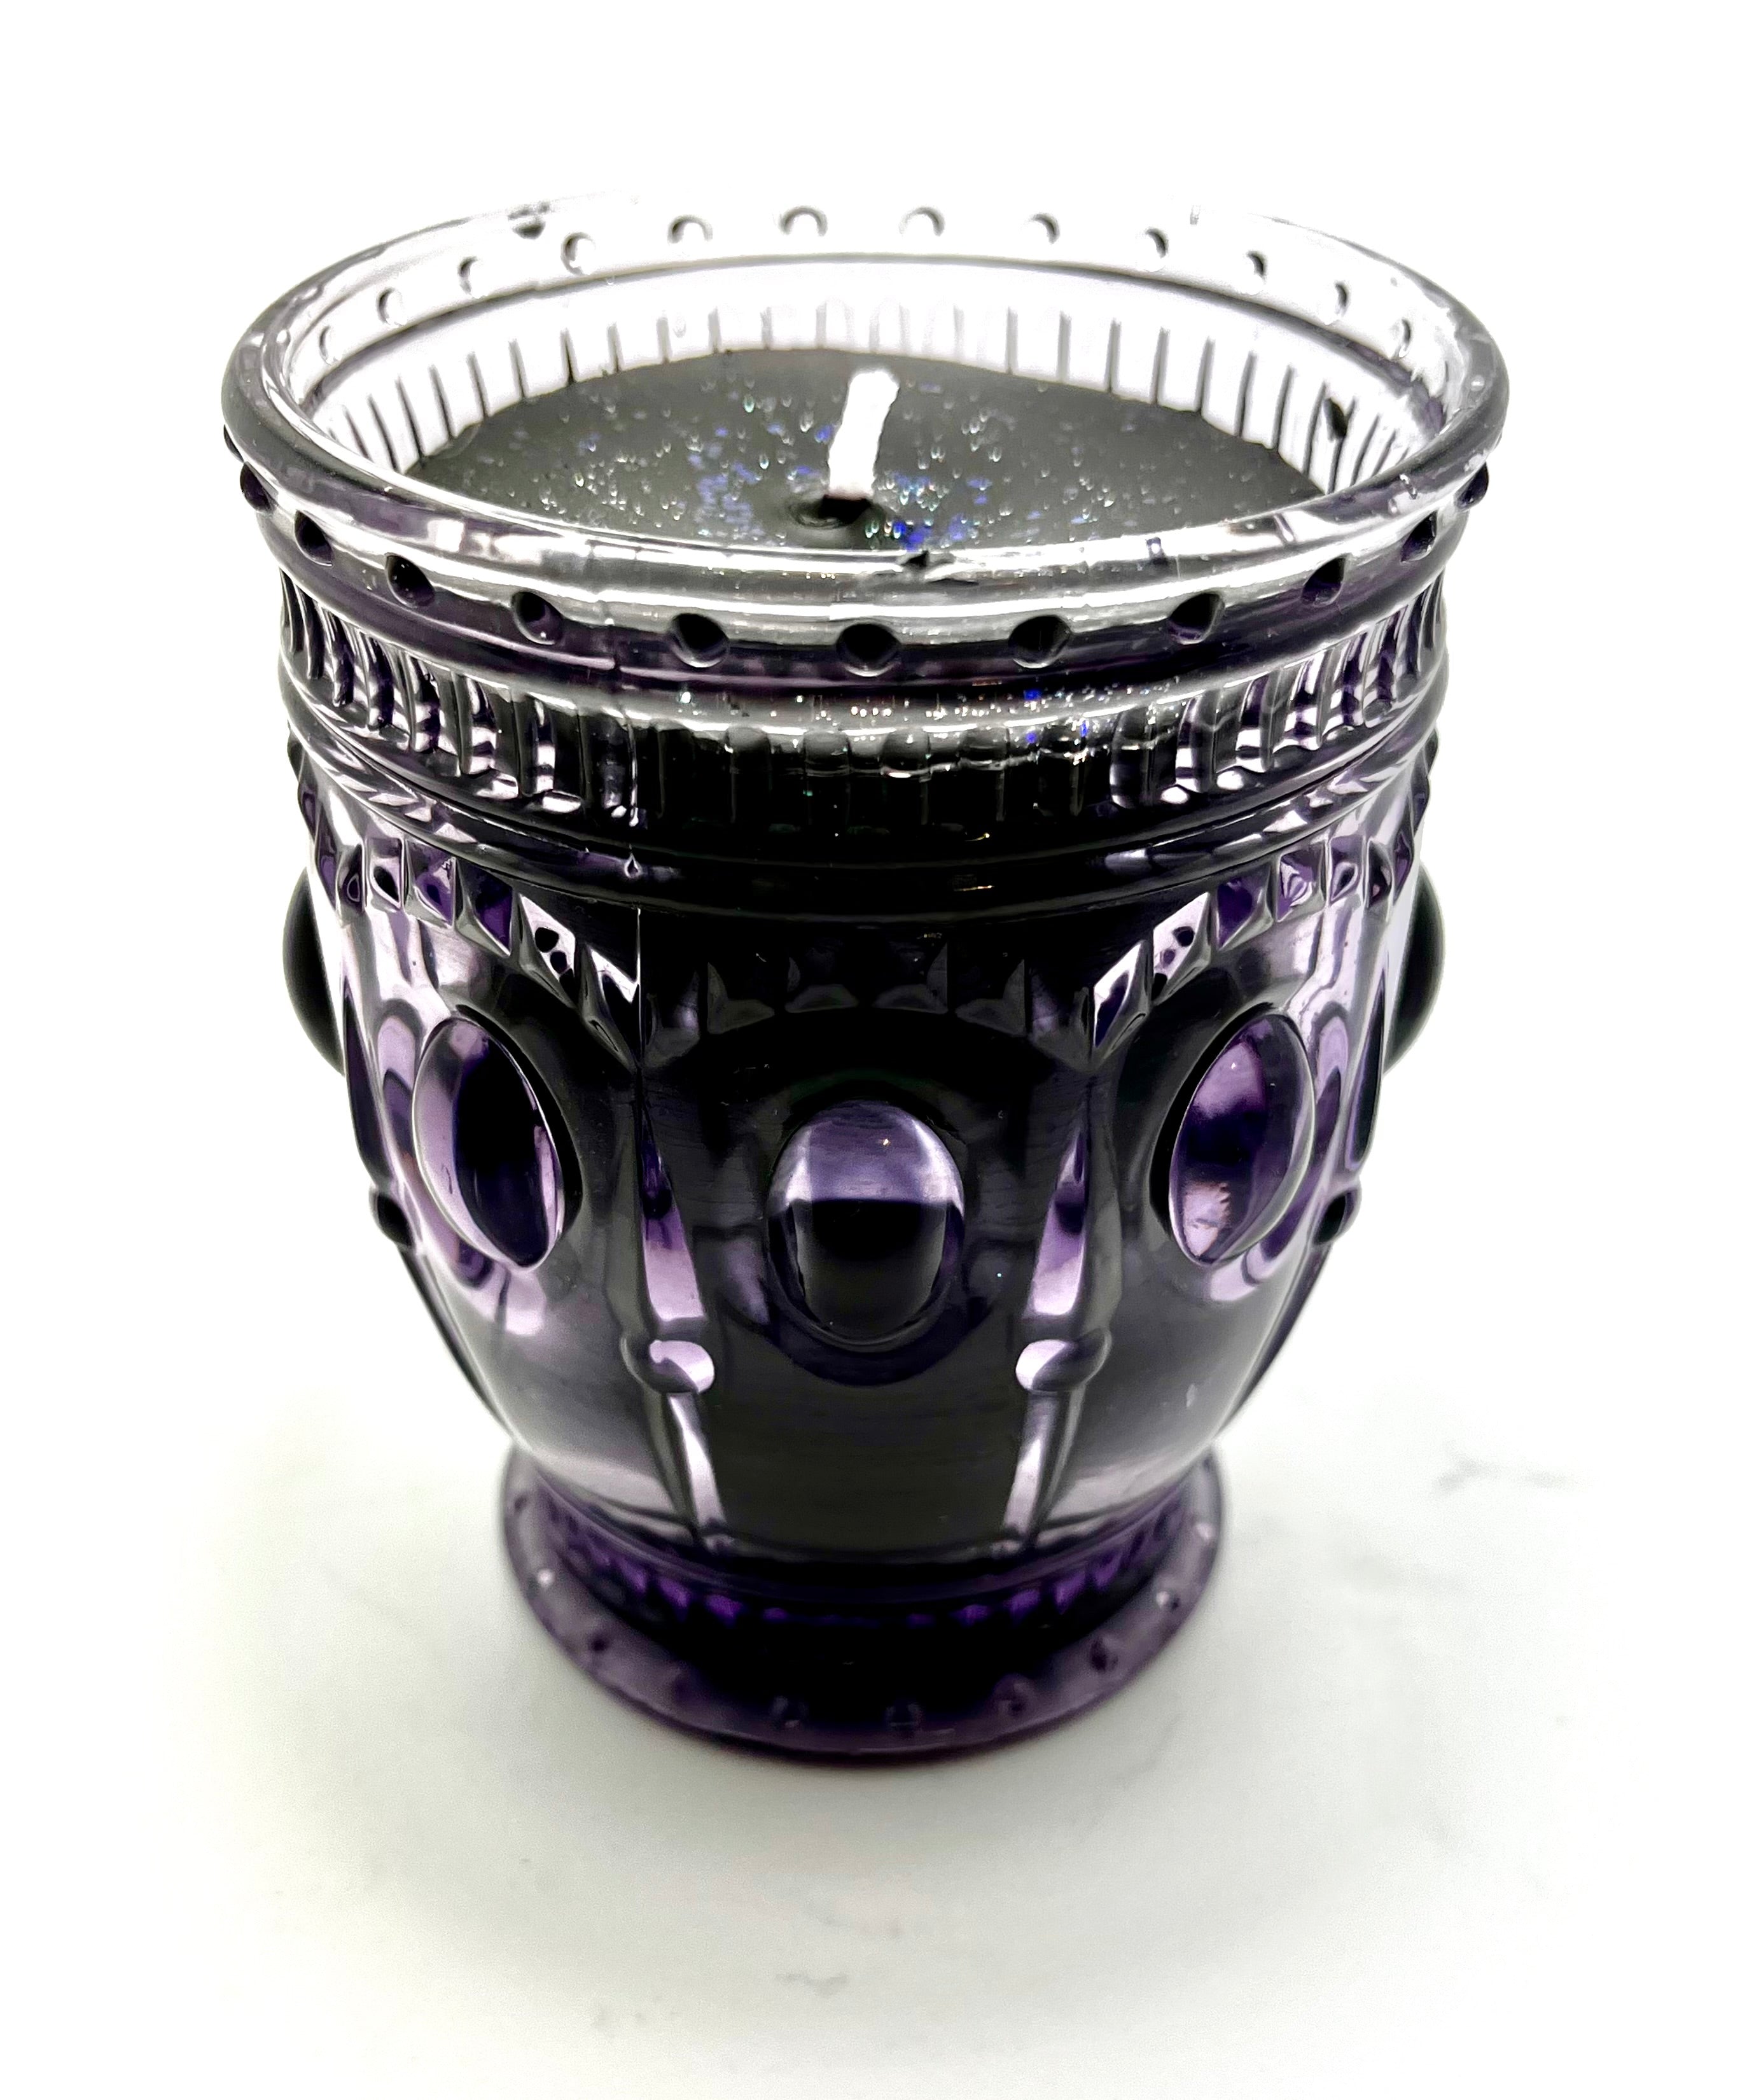 Spellbound Candle